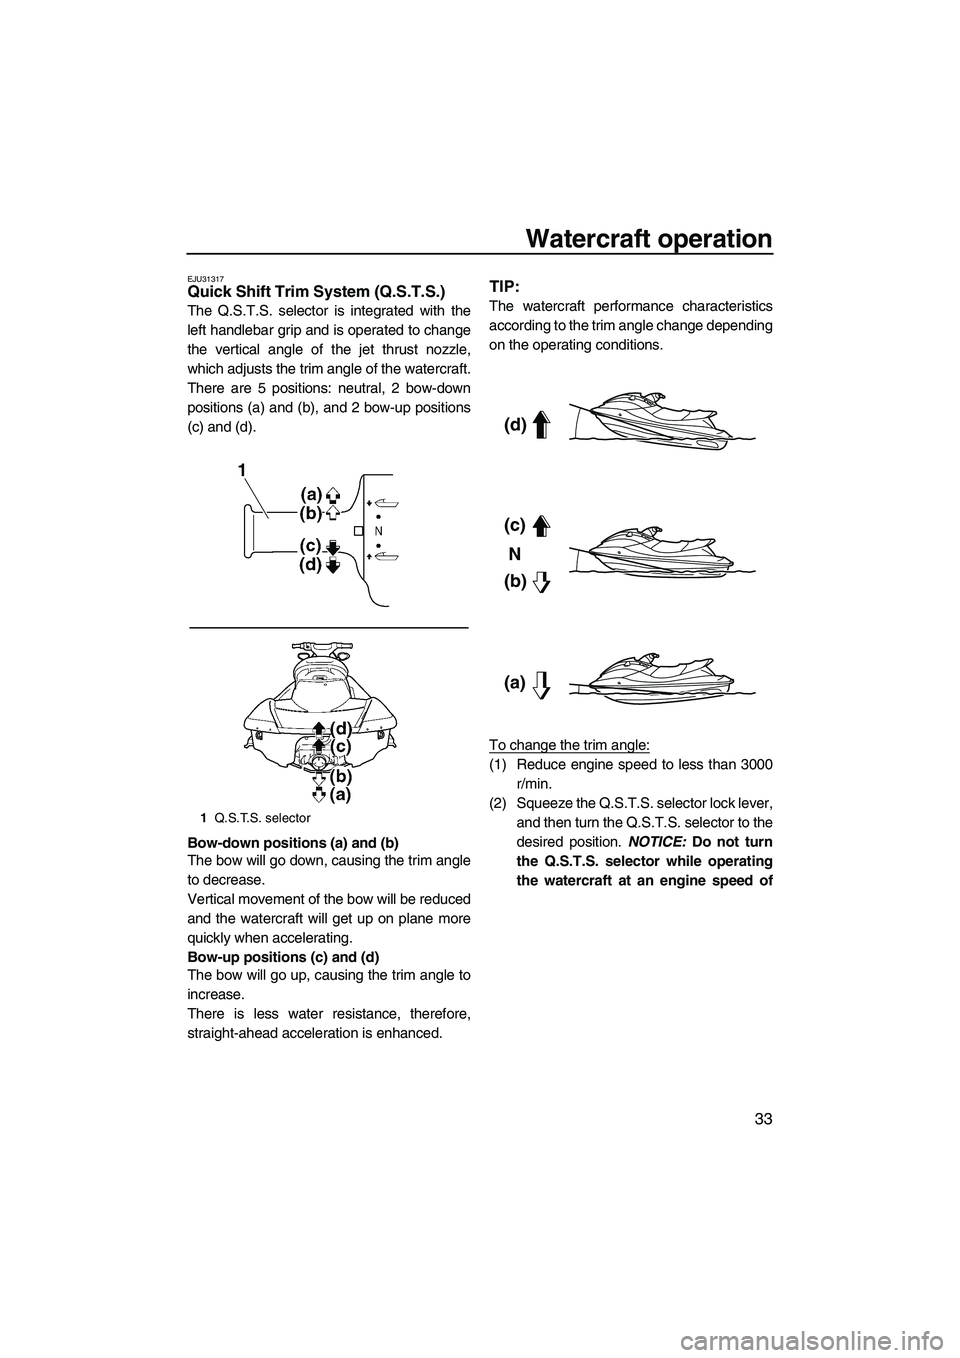 YAMAHA SVHO 2011 Owners Guide Watercraft operation
33
EJU31317Quick Shift Trim System (Q.S.T.S.) 
The Q.S.T.S. selector is integrated with the
left handlebar grip and is operated to change
the vertical angle of the jet thrust nozz